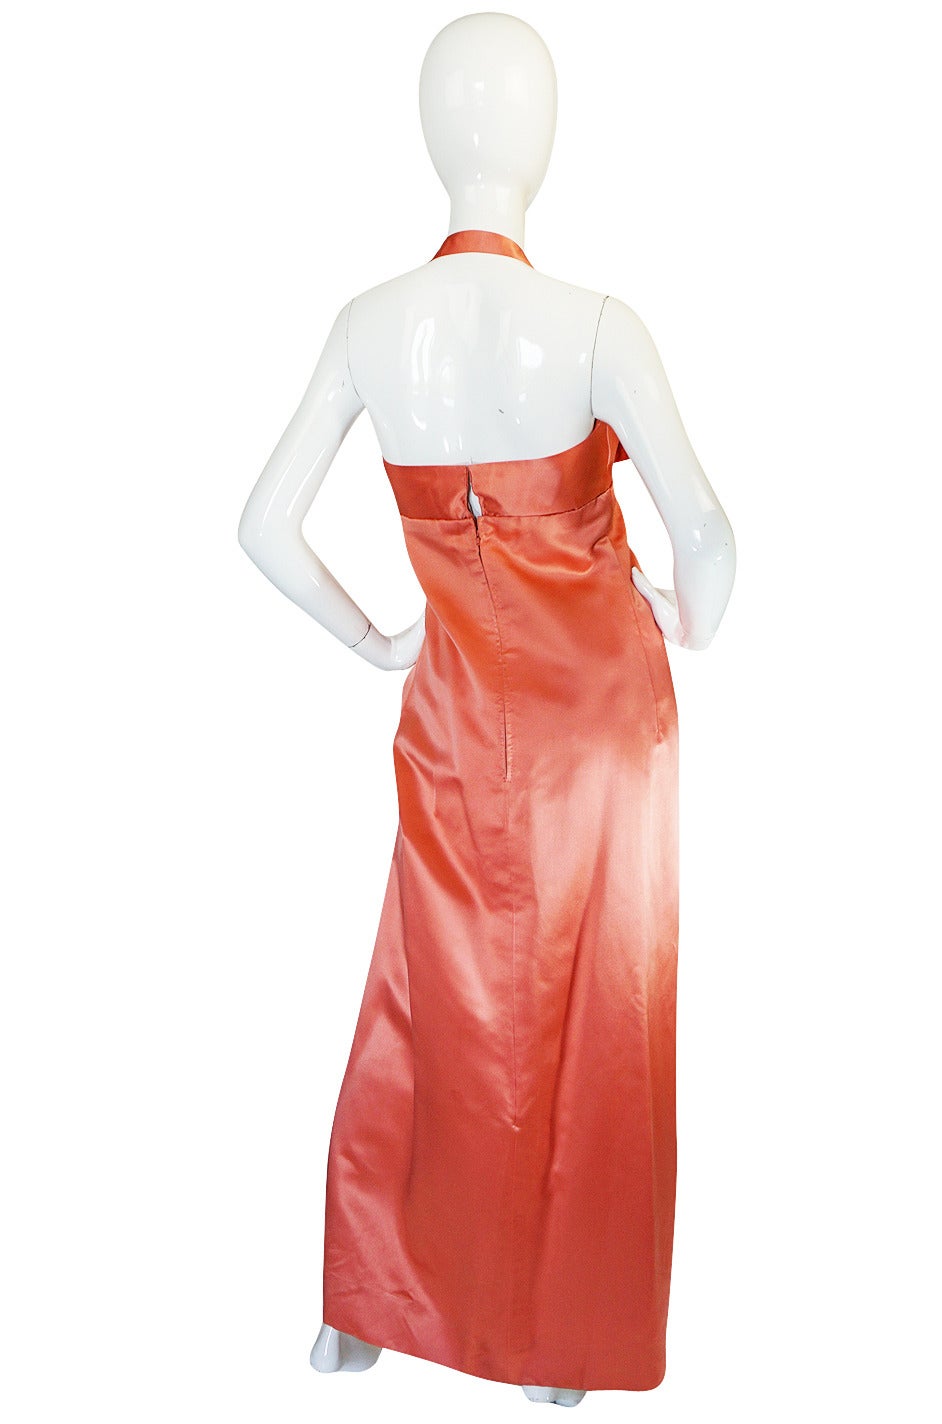 This is a wonderful gown from the late 1950s, maybe early 1960s. The gown is extraordinary. A heavy grade silk satin is hand dyed a salmon pink and that color, combined with the fabric choice, makes it seem to have an inner glow. A simple sheath